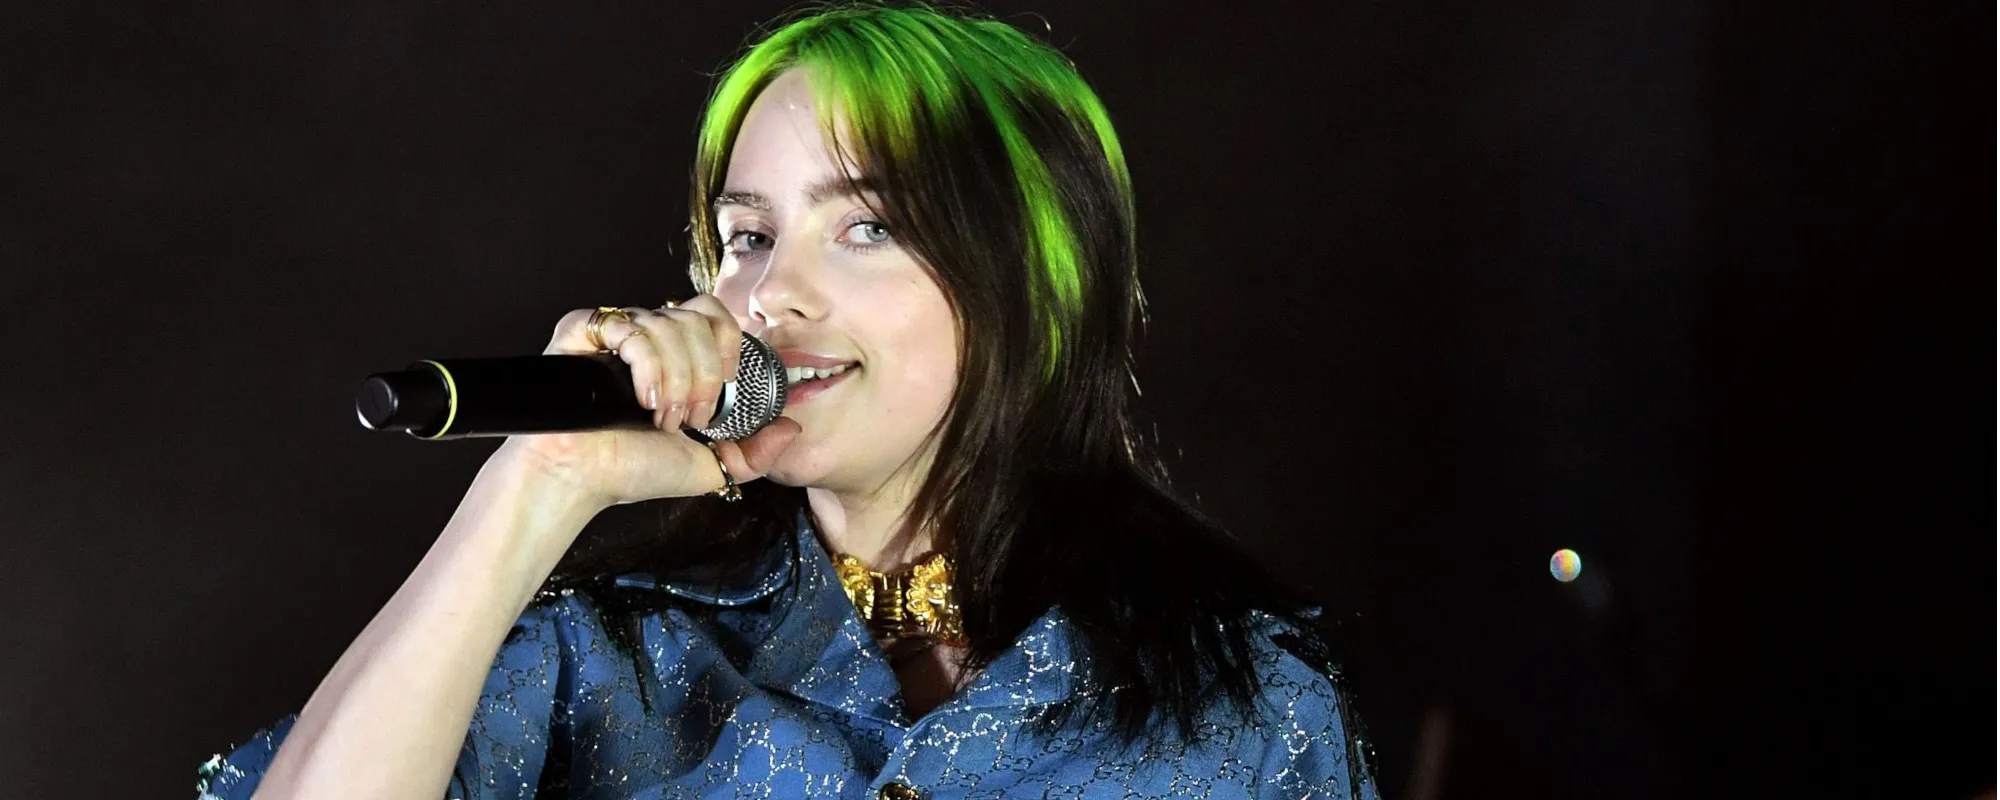 Billie Eilish Pulls Curtains Back in Emotional Golden Globes Reveal: “Writing that Song Kind of Saved Me”